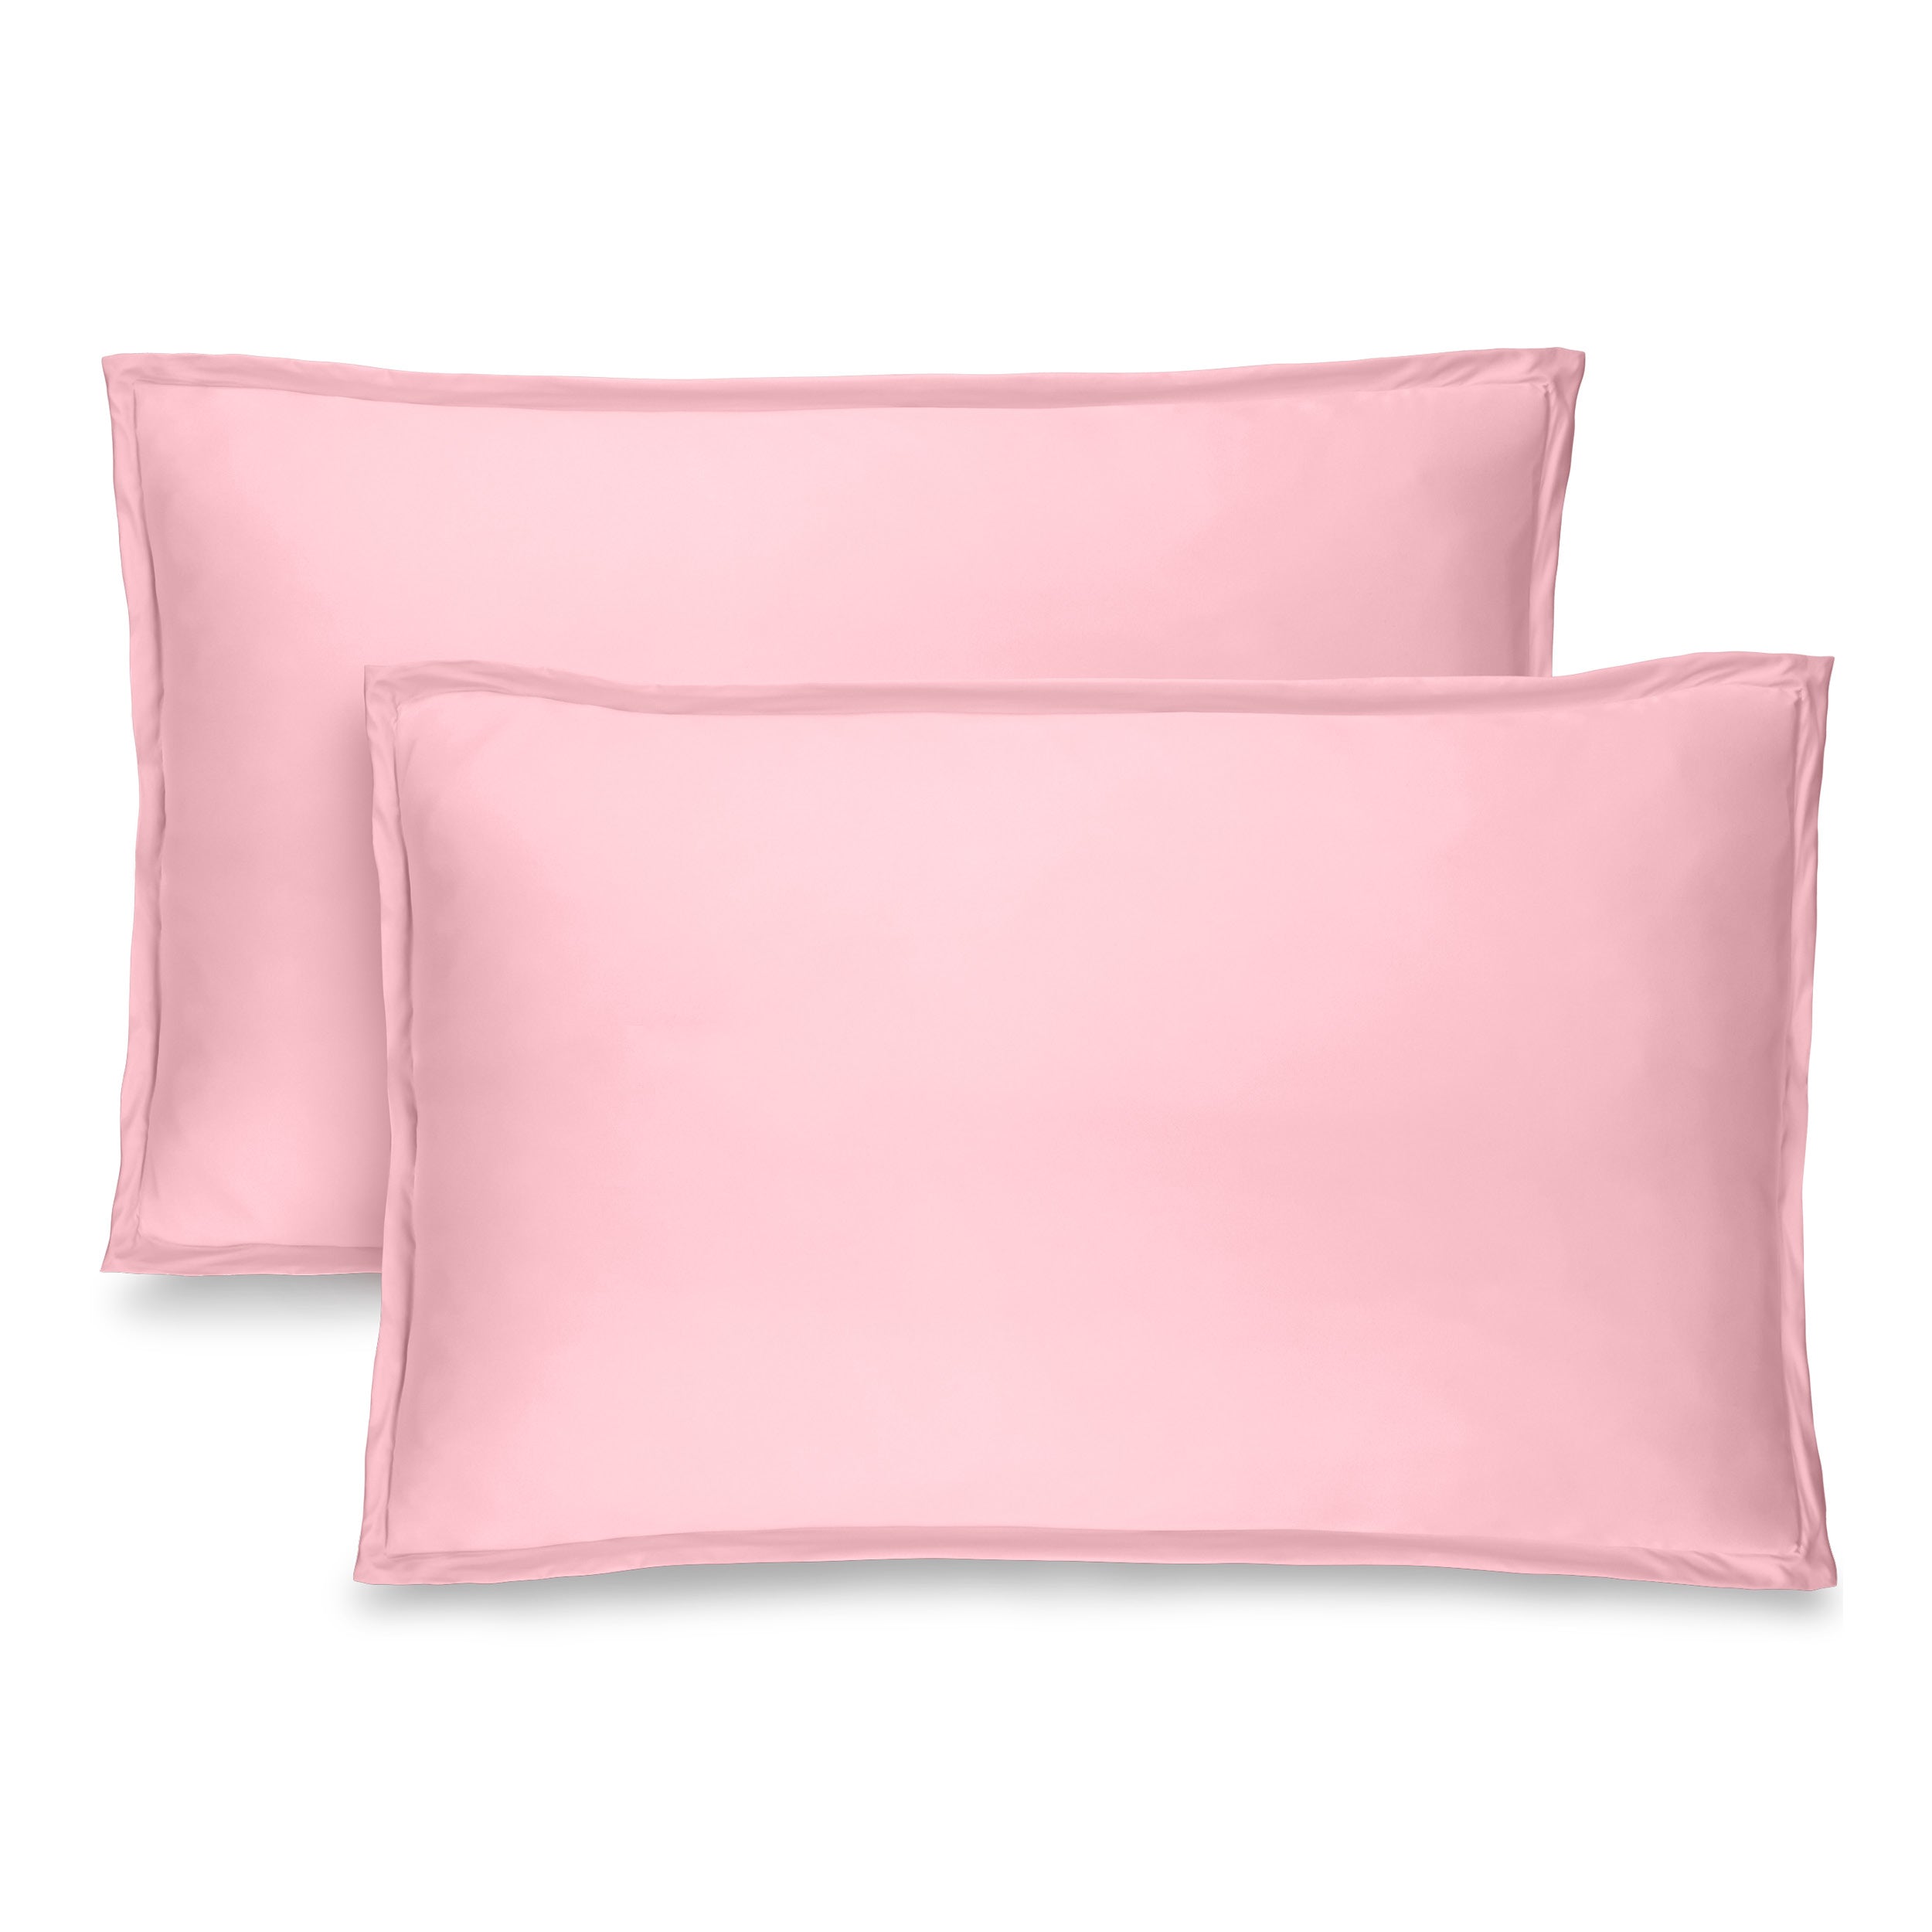 Two pink pillow shams on pillows standing up with one behind the other